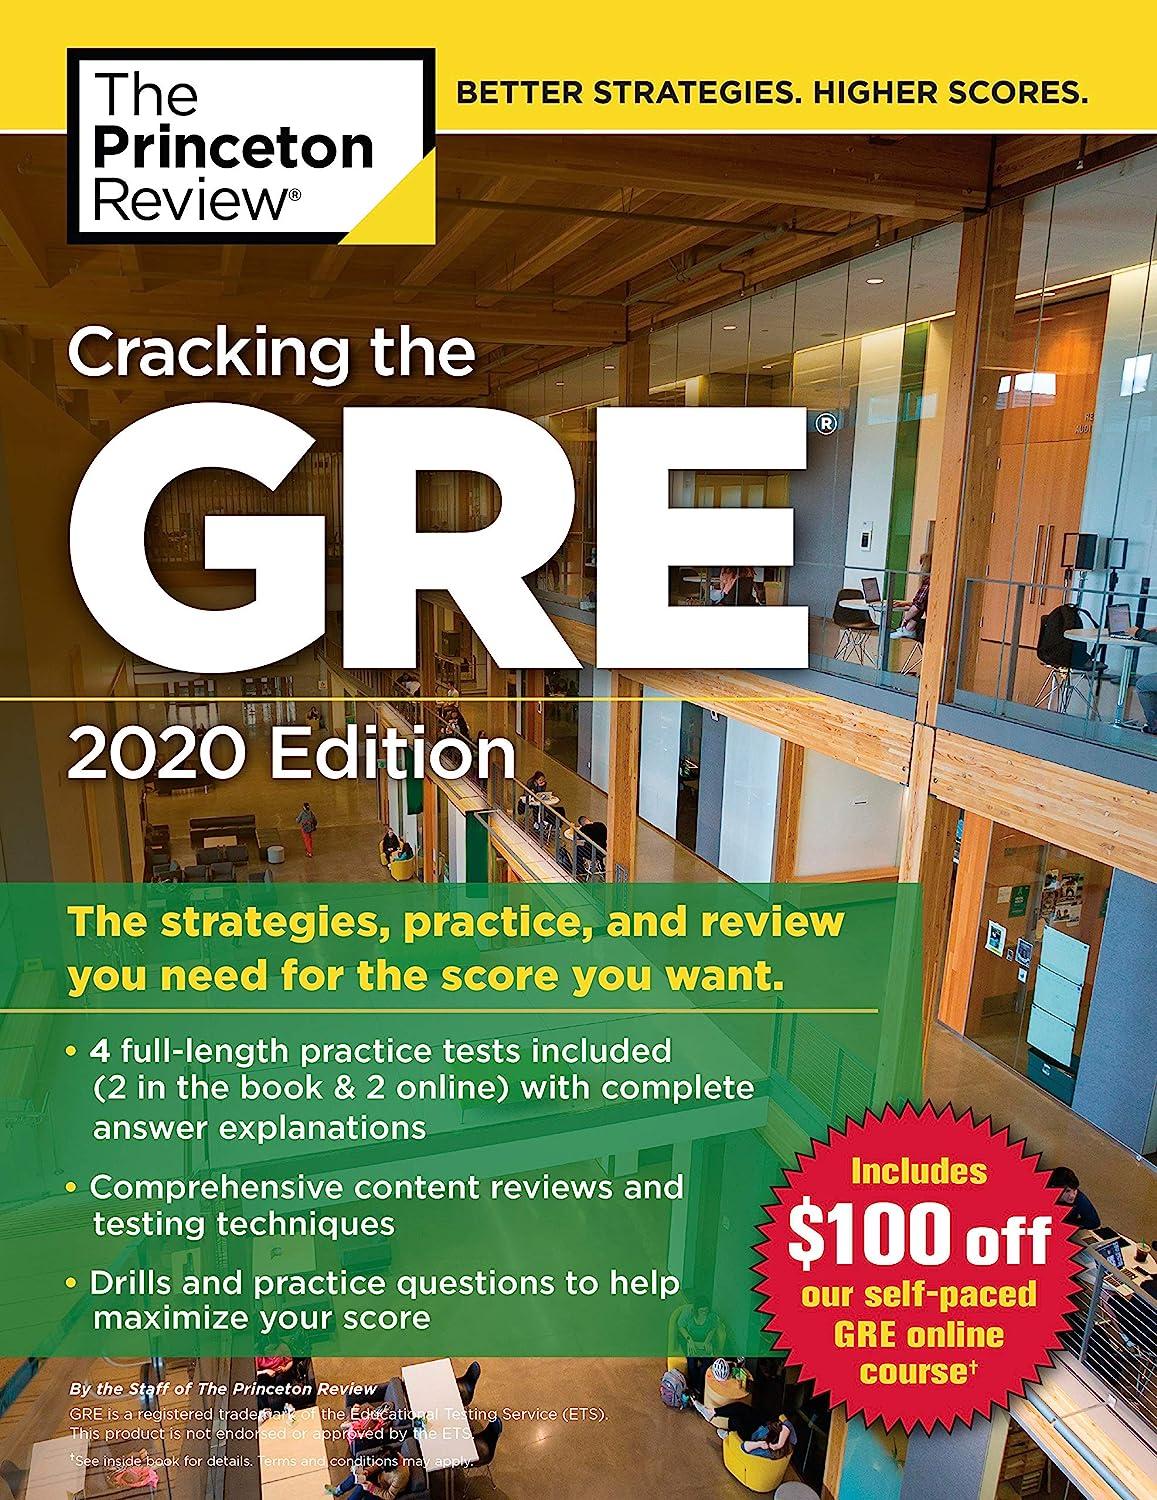 Cracking The GRE With 4 Practice Tests 2020 The Strategies Practice And Review You Need For The Score You Want